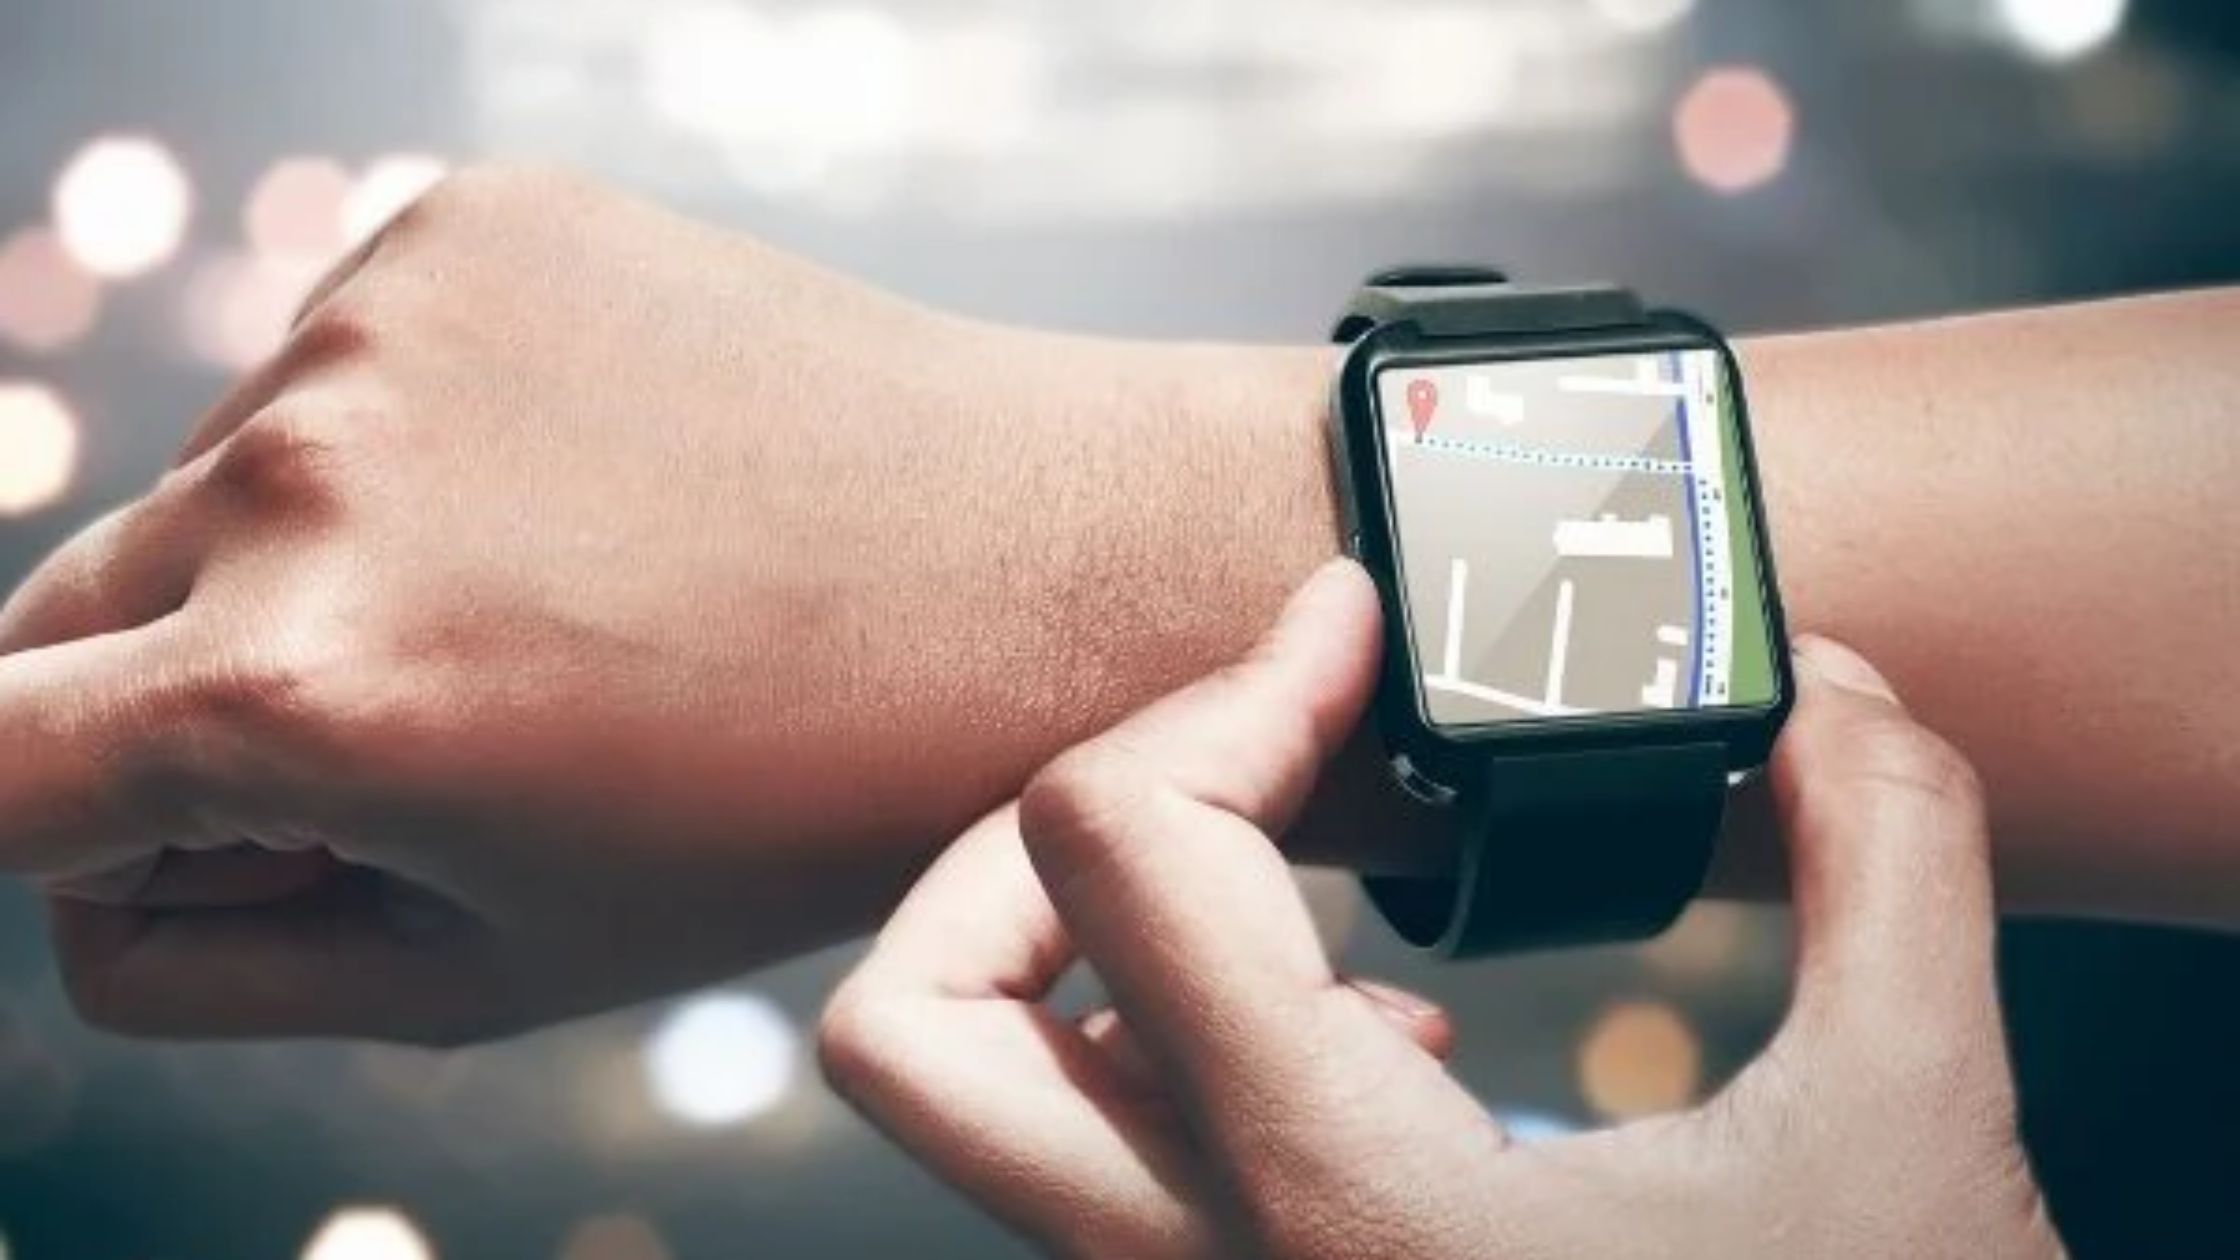 How To Use GPS In A Smartwatch